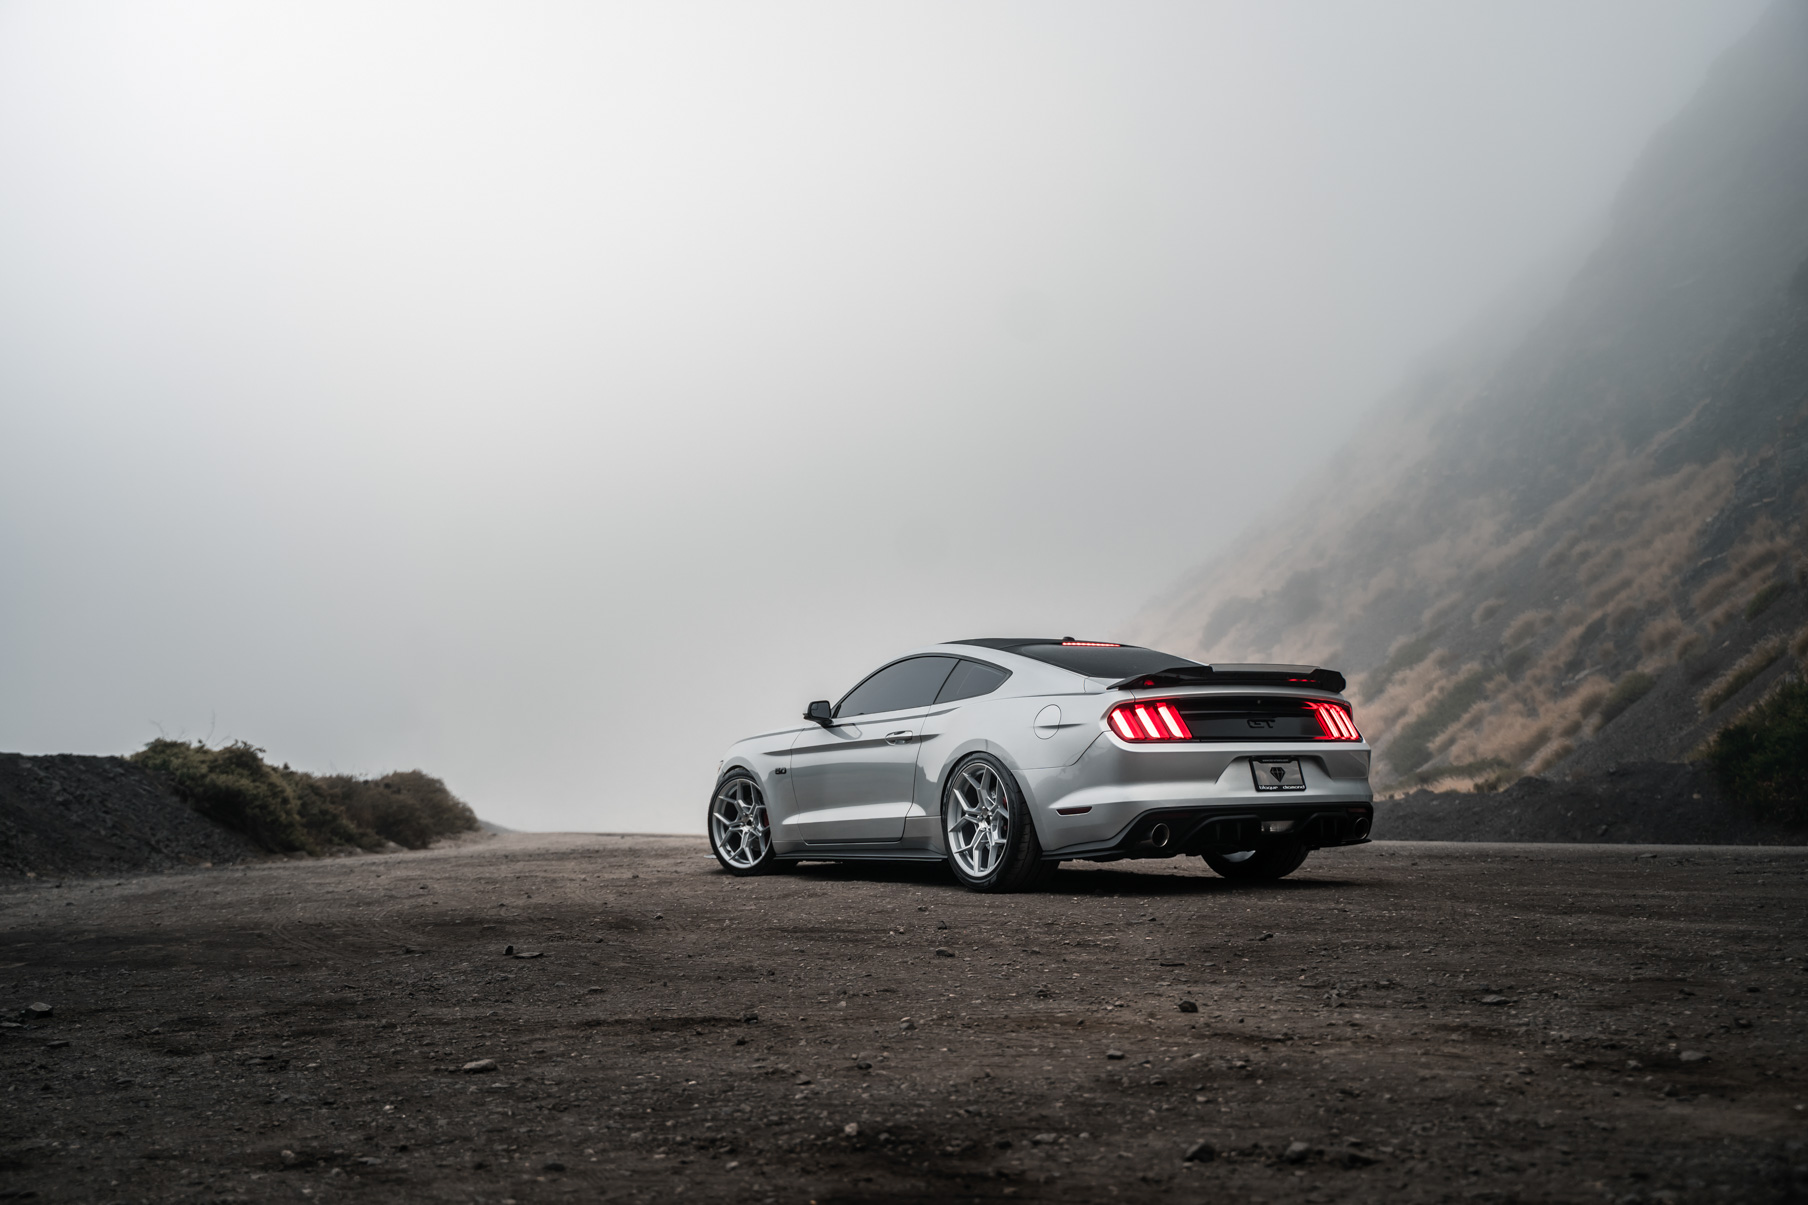 S650 Mustang Blaque Diamond BD-F18 BD-D25 BD-F29 Flow Forged Series - Vibe Motorsports 2016_Mustang_GT_Blaque_Diamond_wheels_BDF25_20_inch_Brushed_Silver-5